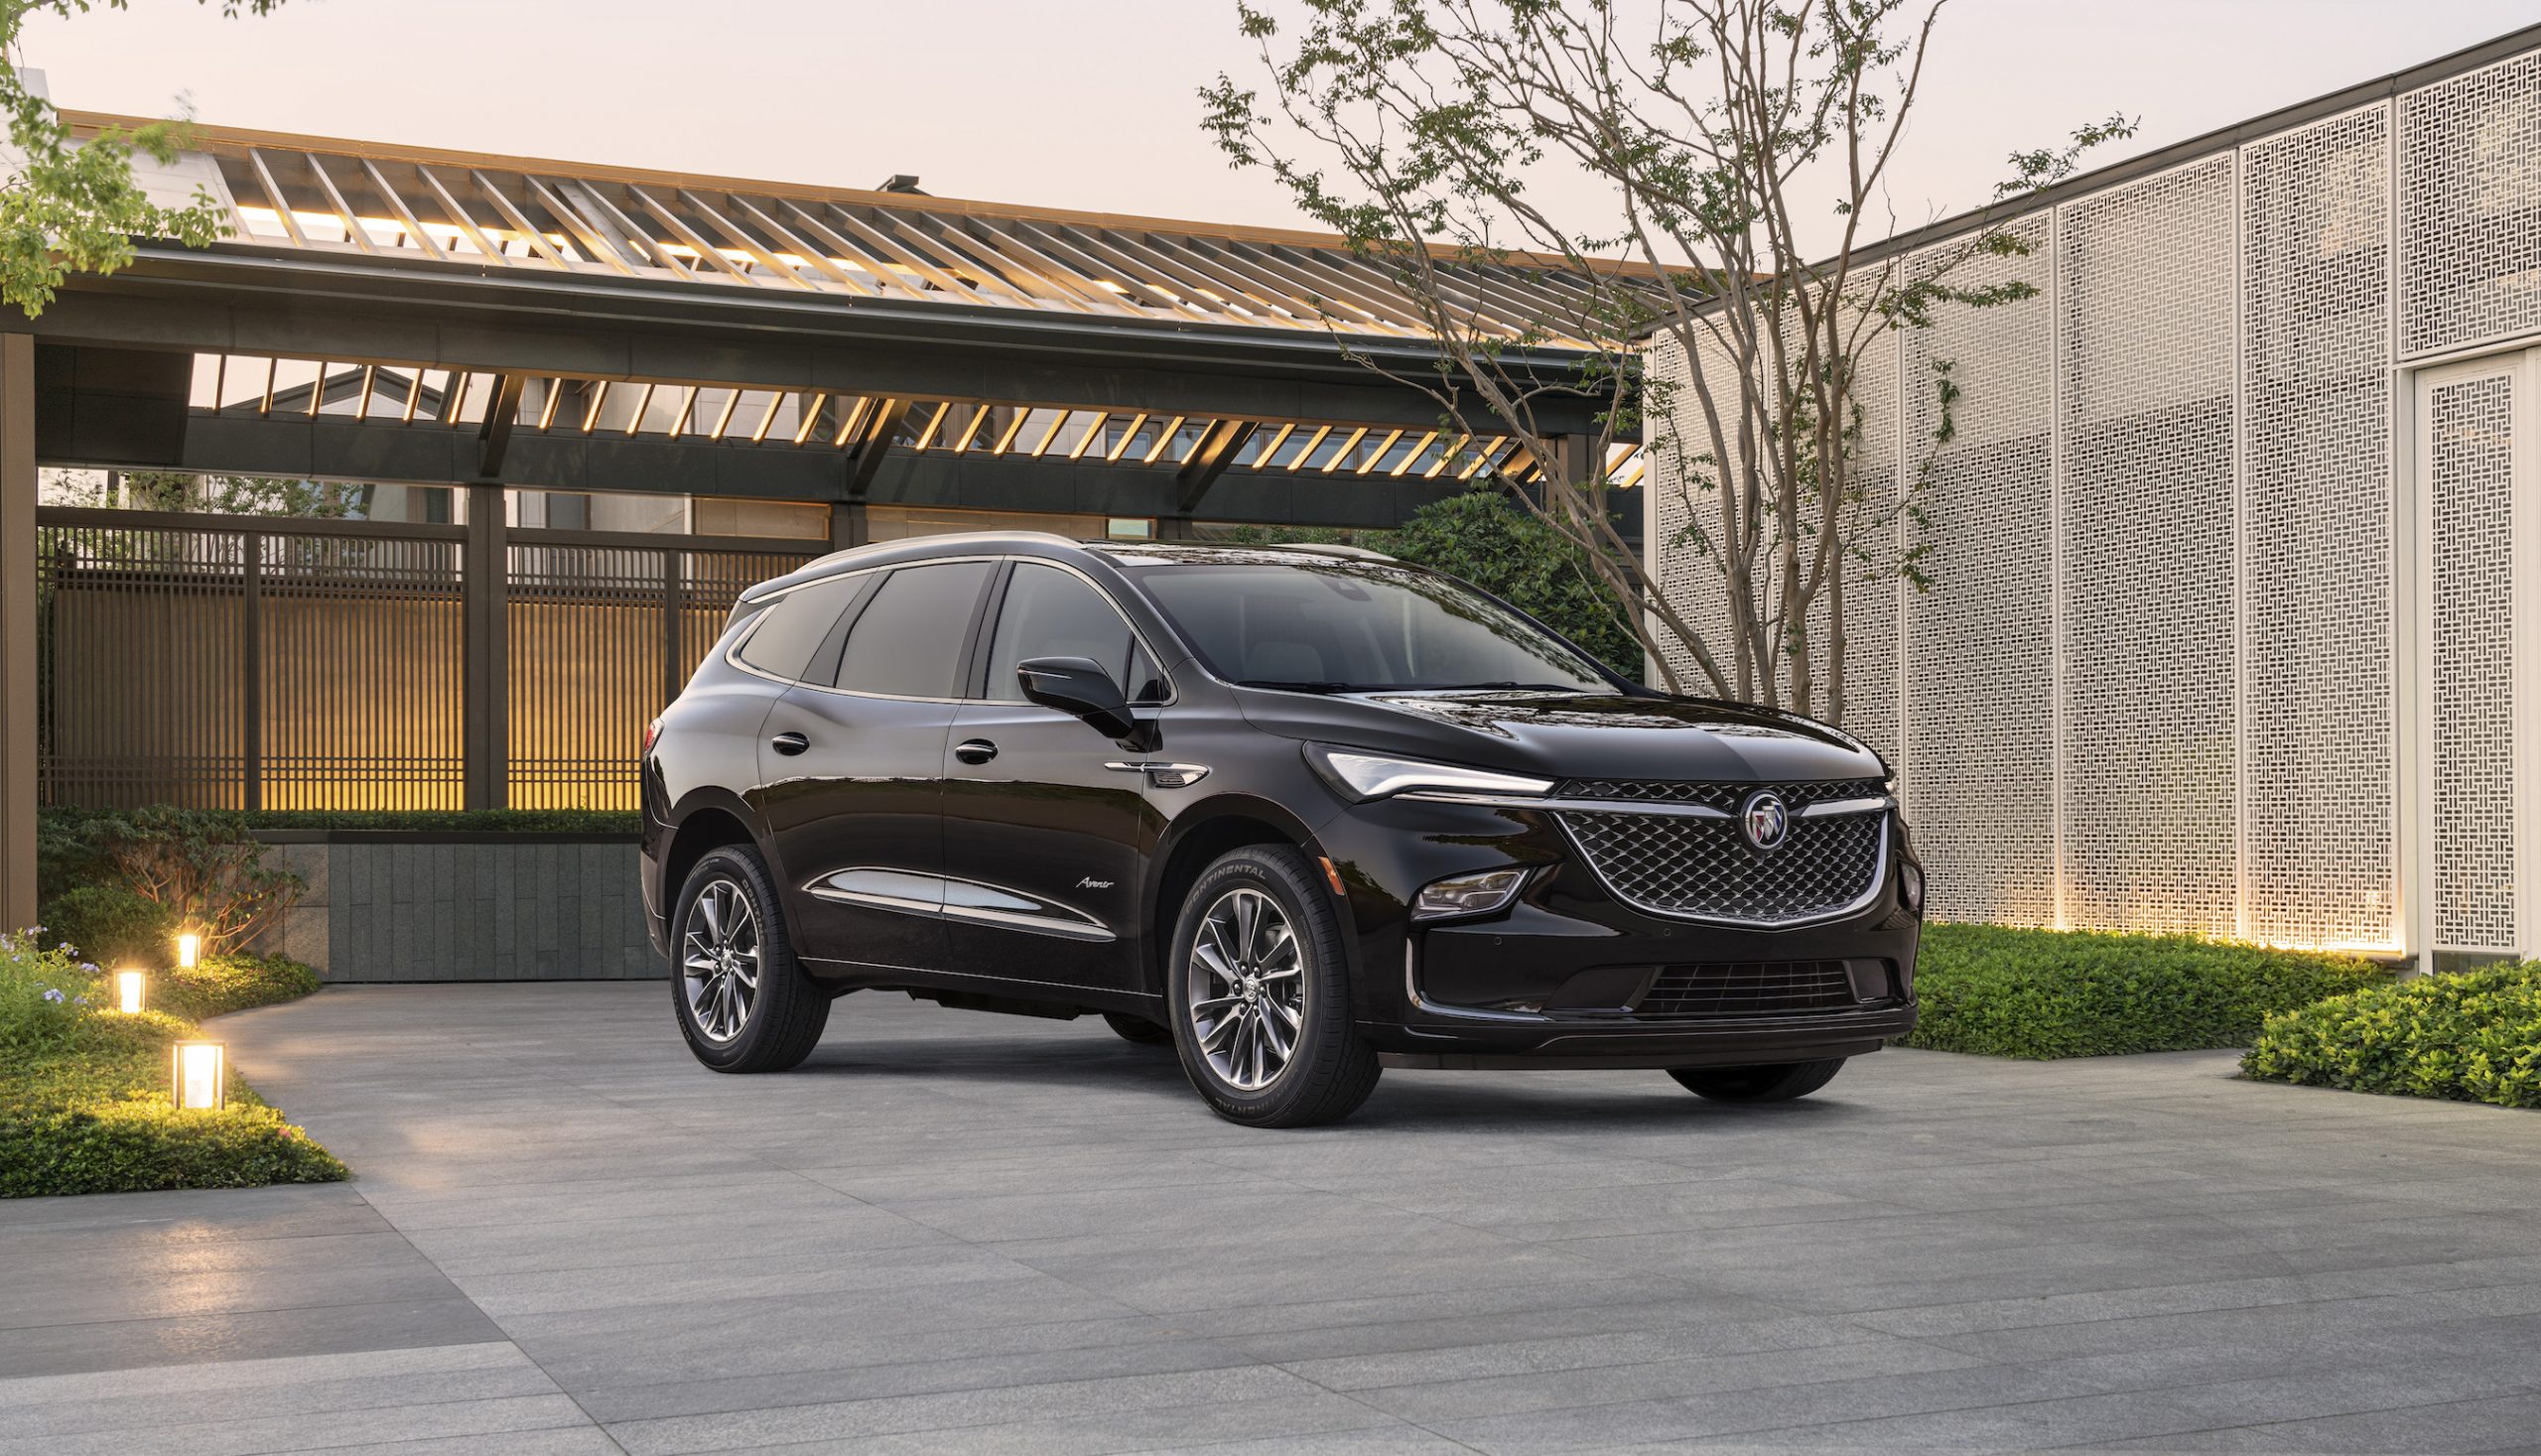 The 2022 Buick Enclave Avenir in black parked in front of a modern home